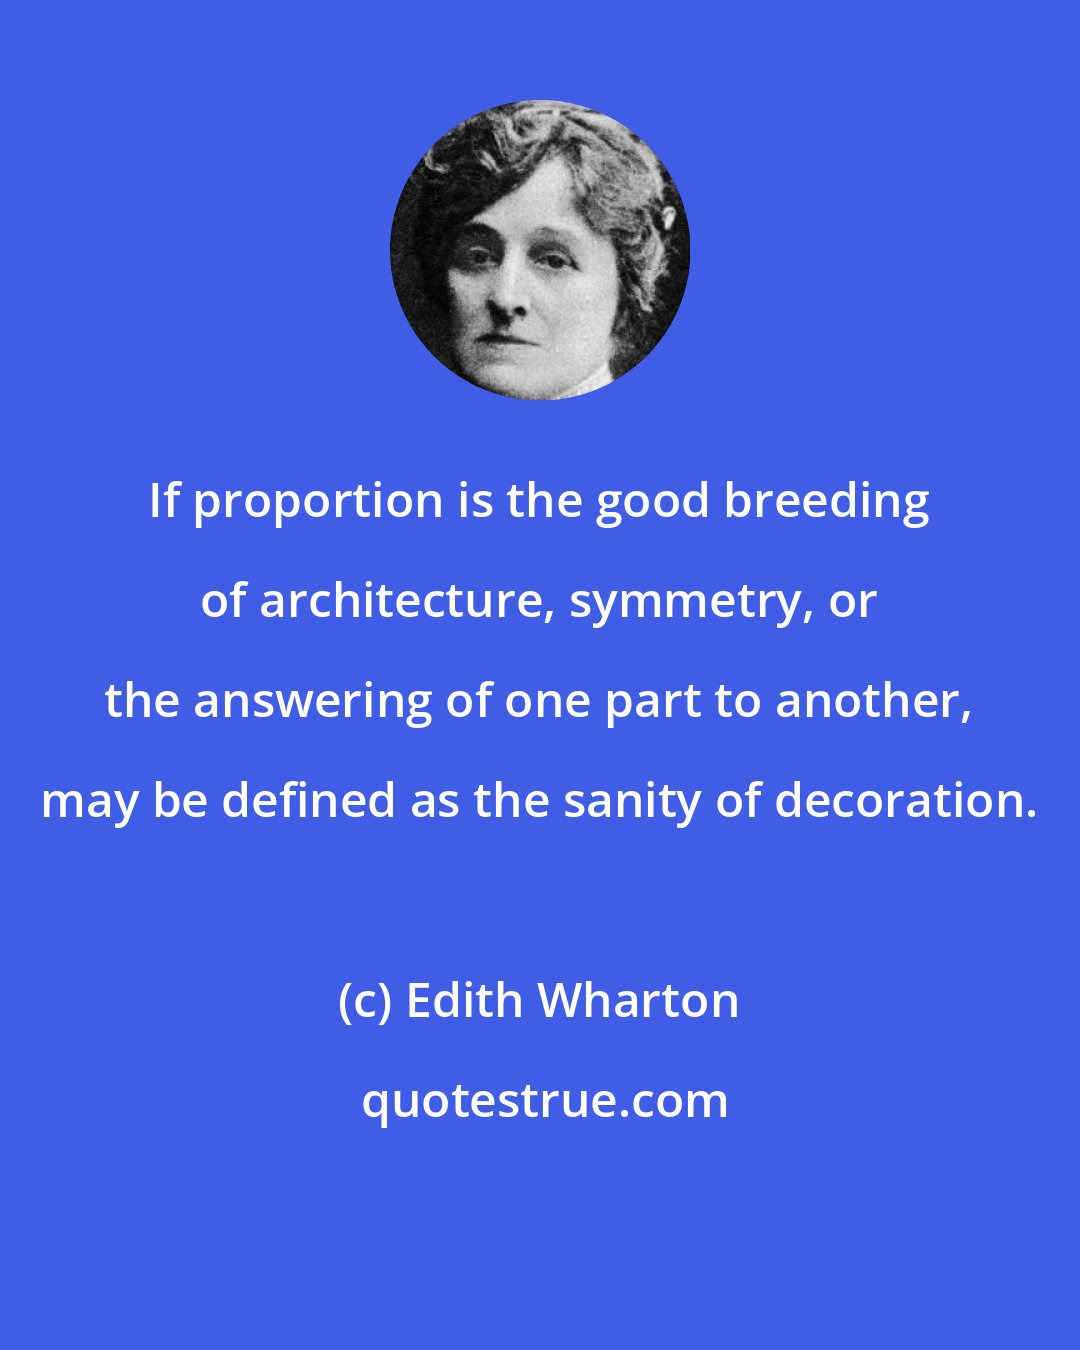 Edith Wharton: If proportion is the good breeding of architecture, symmetry, or the answering of one part to another, may be defined as the sanity of decoration.